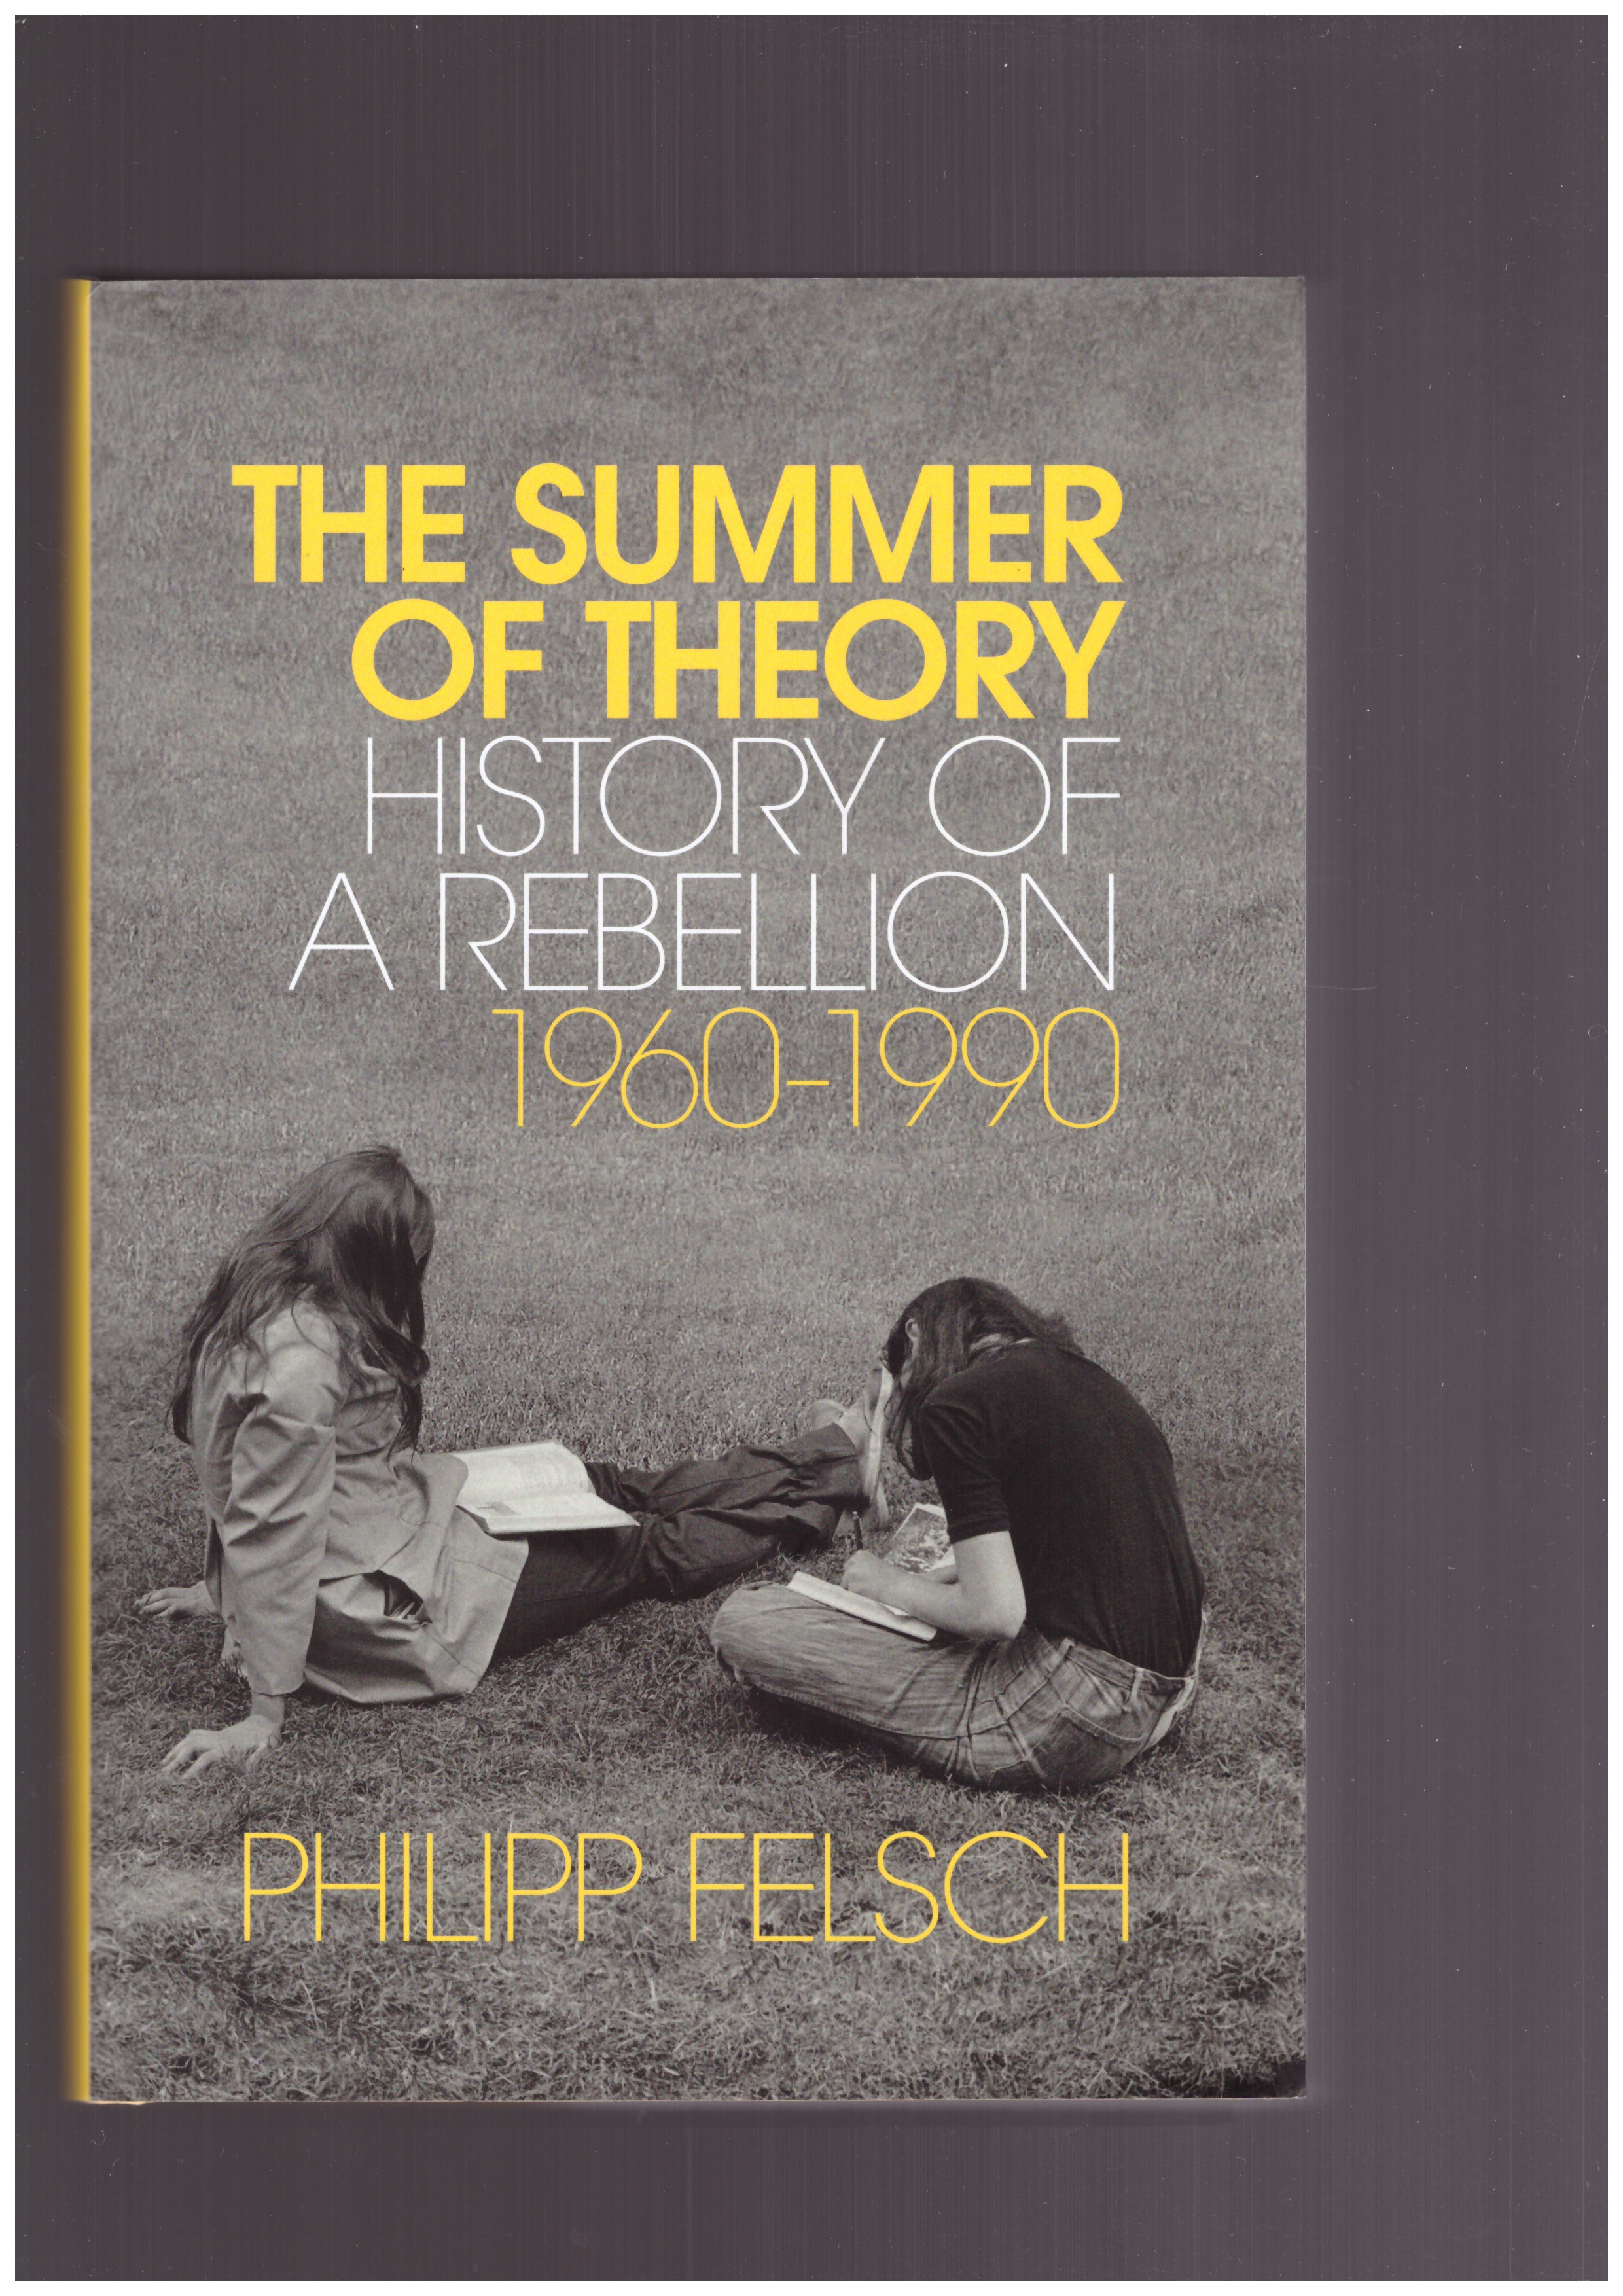 FELSCH, Philipp - The Summer of Theory. History of a Rebellion 1960-1990